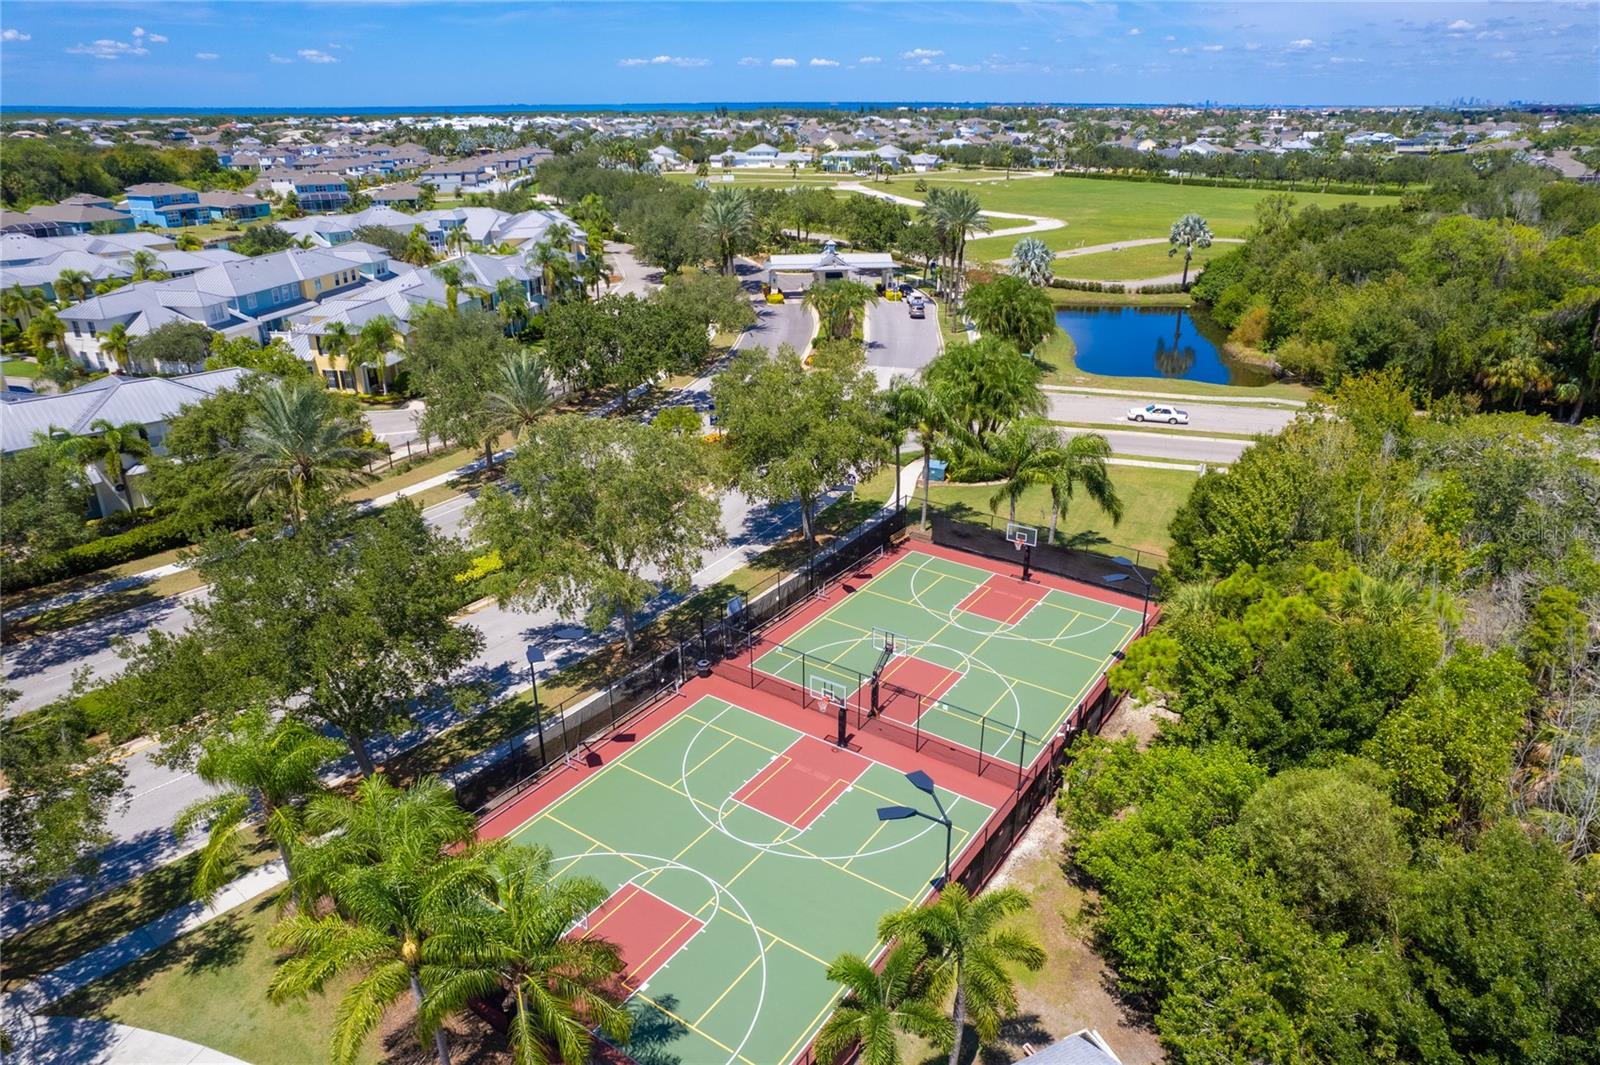 Basketball Courts - also used for Pickleball.